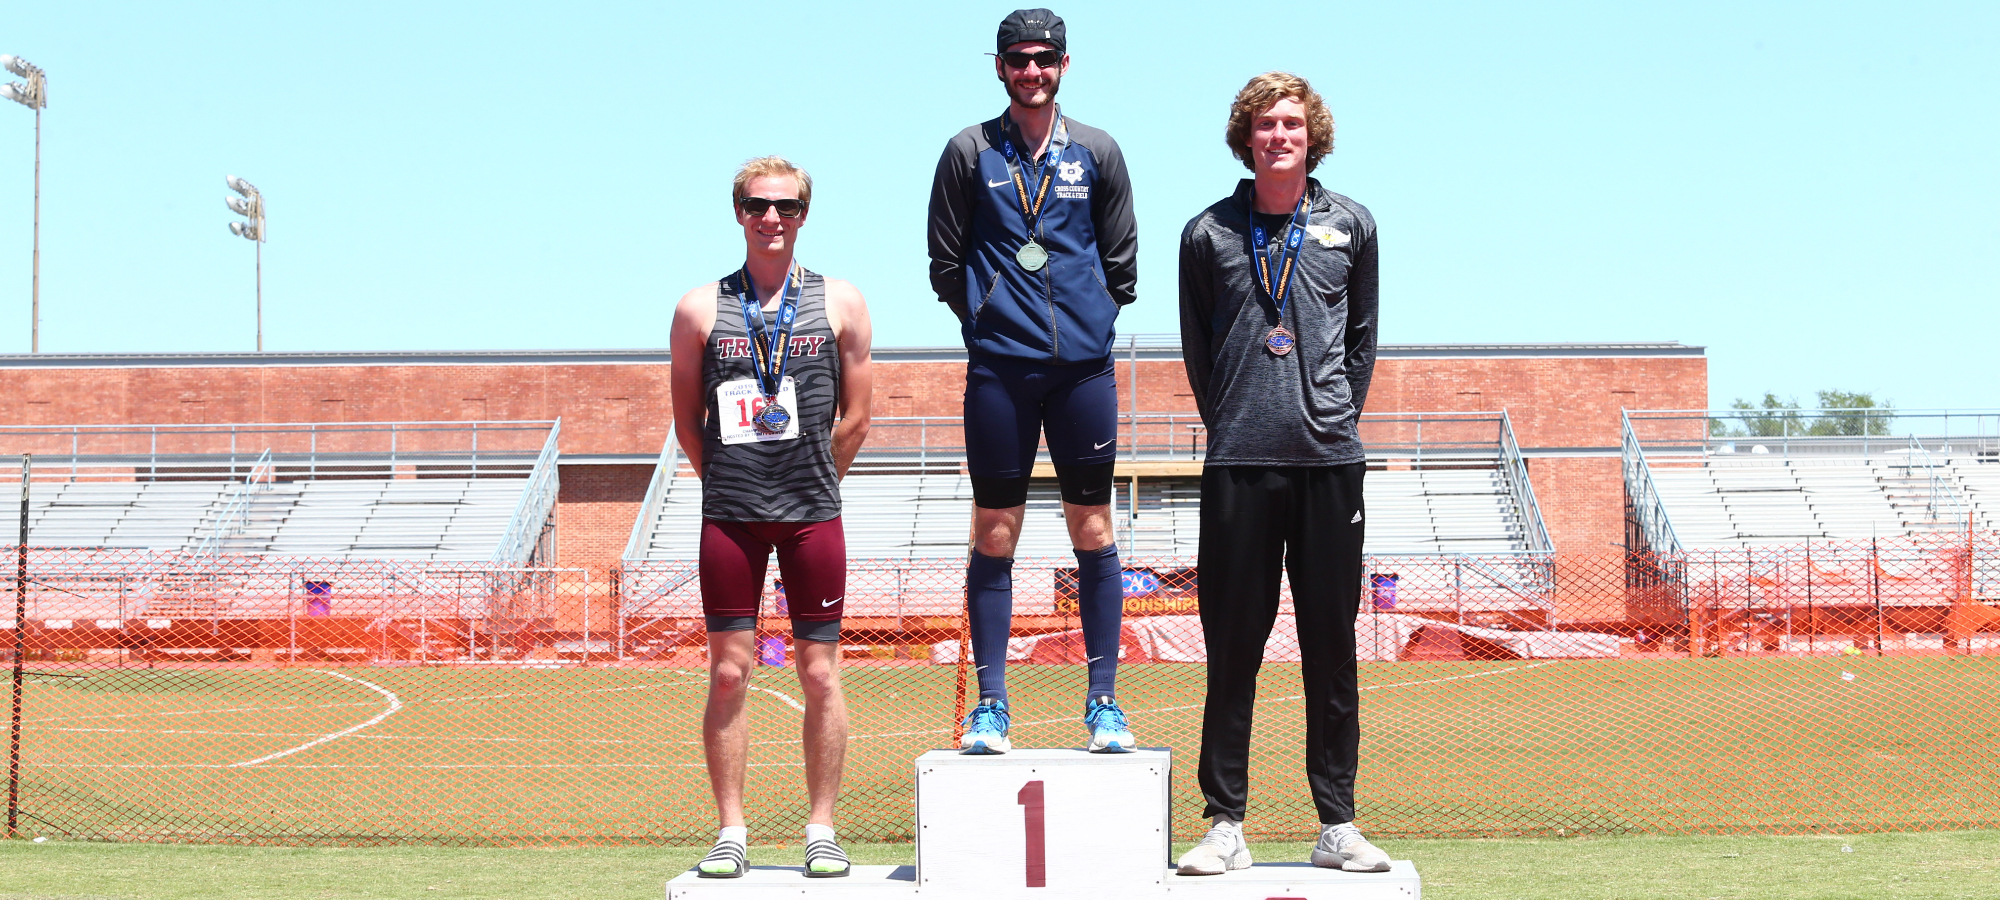 McGuirk Takes Home Gold Medal in Men's 400-Meter Hurdles; Garners School Record In 5th Straight Competition